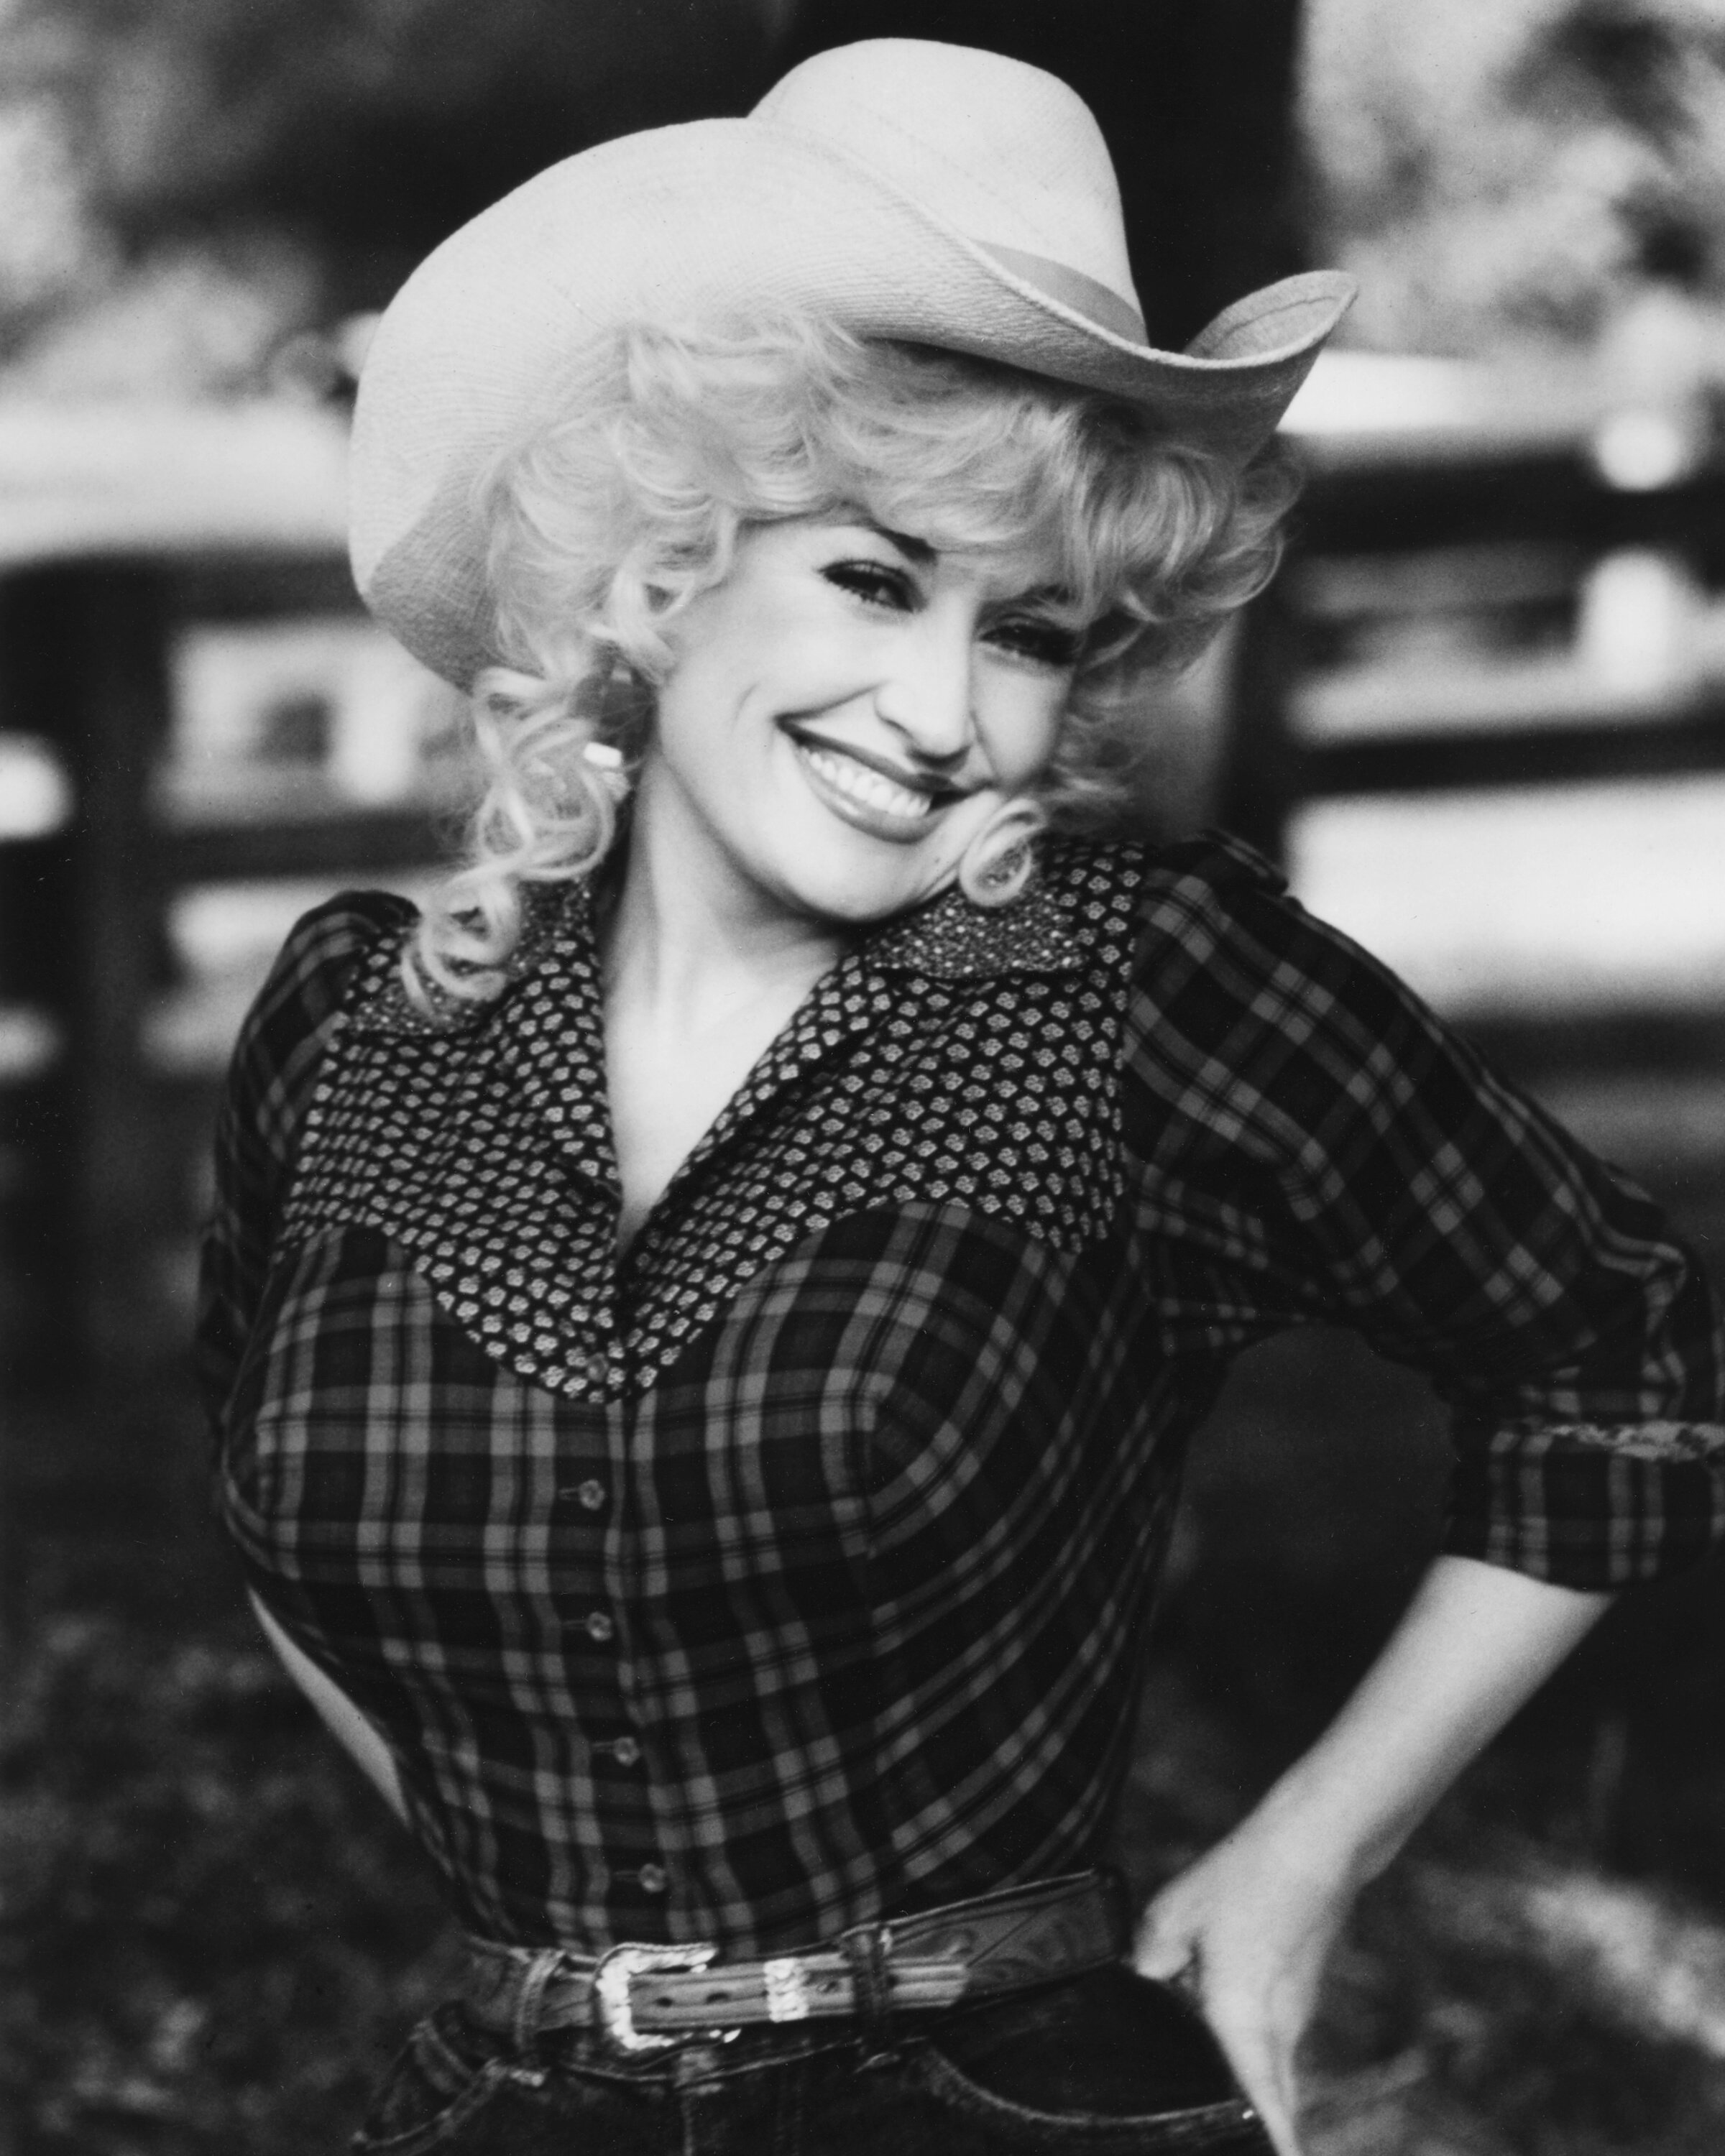 Dolly Parton in a cowgirl hat.